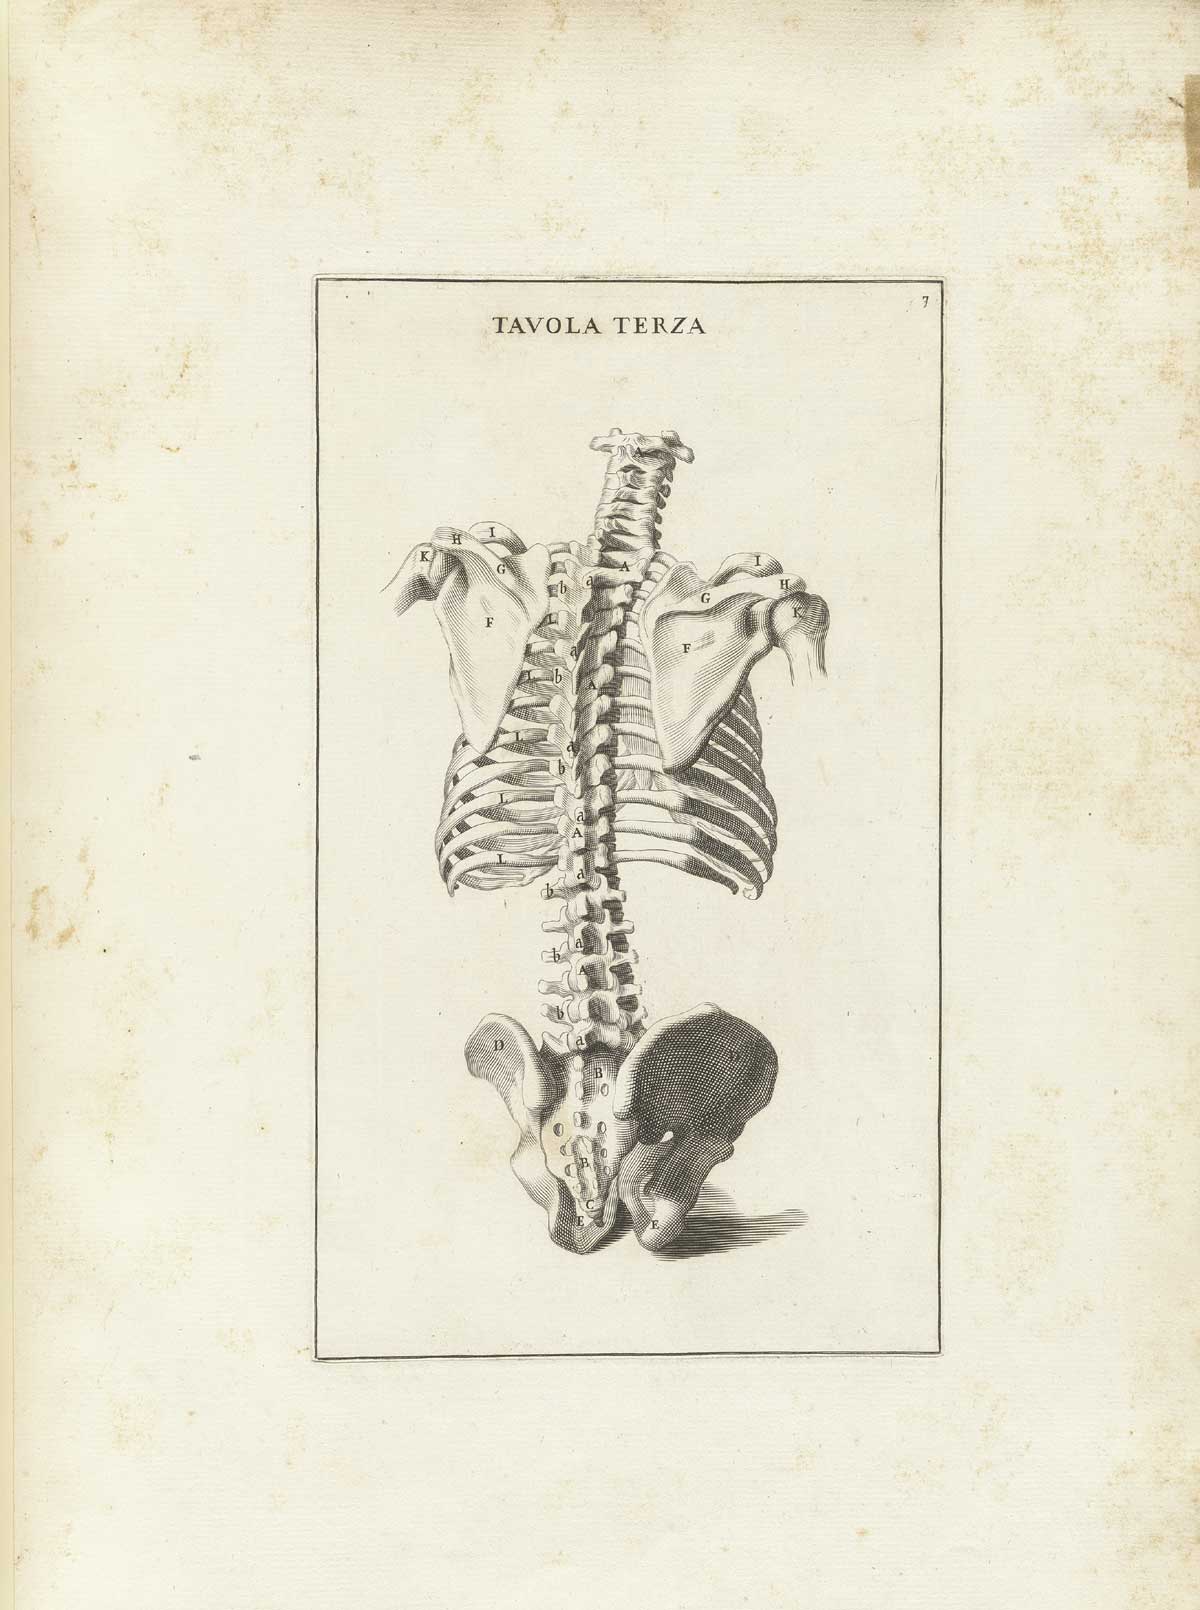 Engraving of a skeleton facing away from the viewer without head or limbs, focusing on the ribcage, spinal column and pelvis; from Bernardino Genga’s Anatomia per uso et intelligenza del disegno, NLM Call no.: WZ 250 G329an 1691.